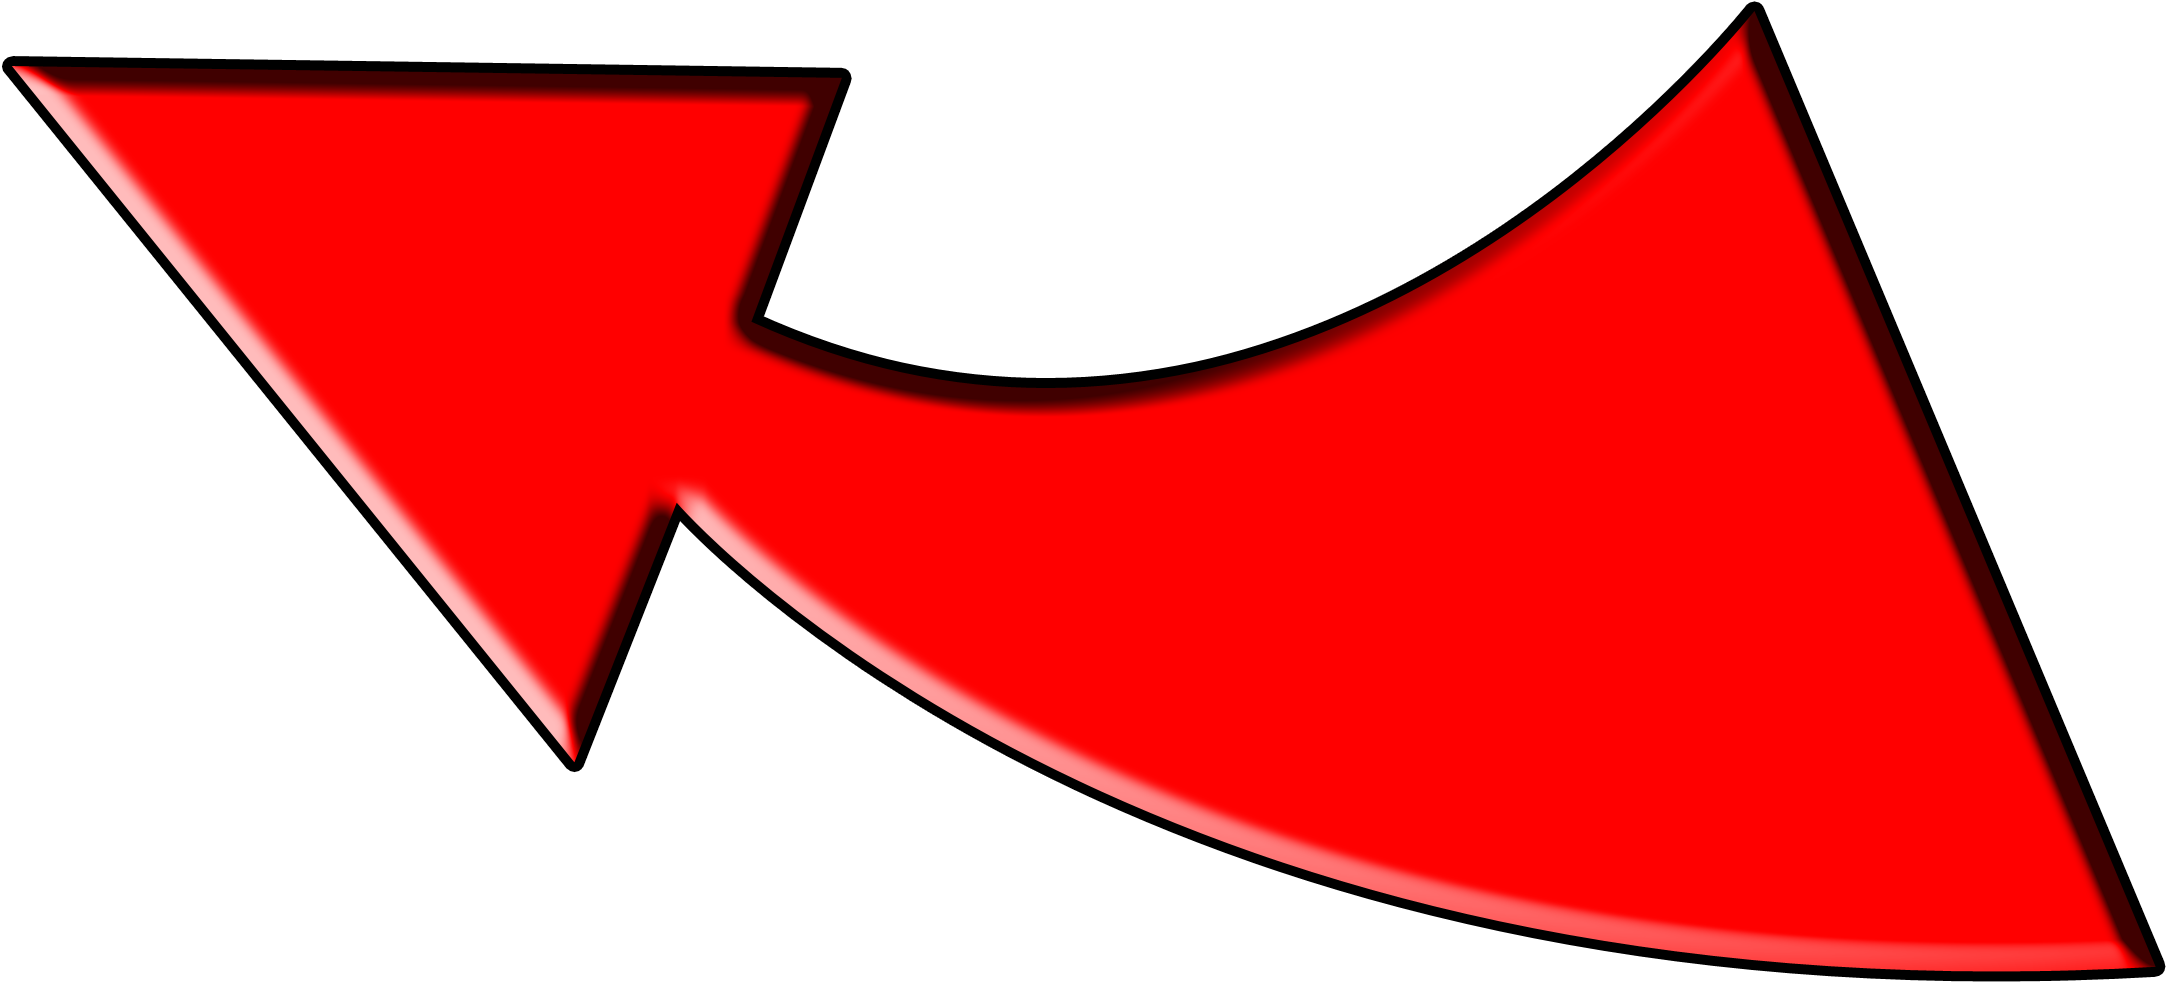 Community Engagement - Big Red Arrow Png (2304x1296)